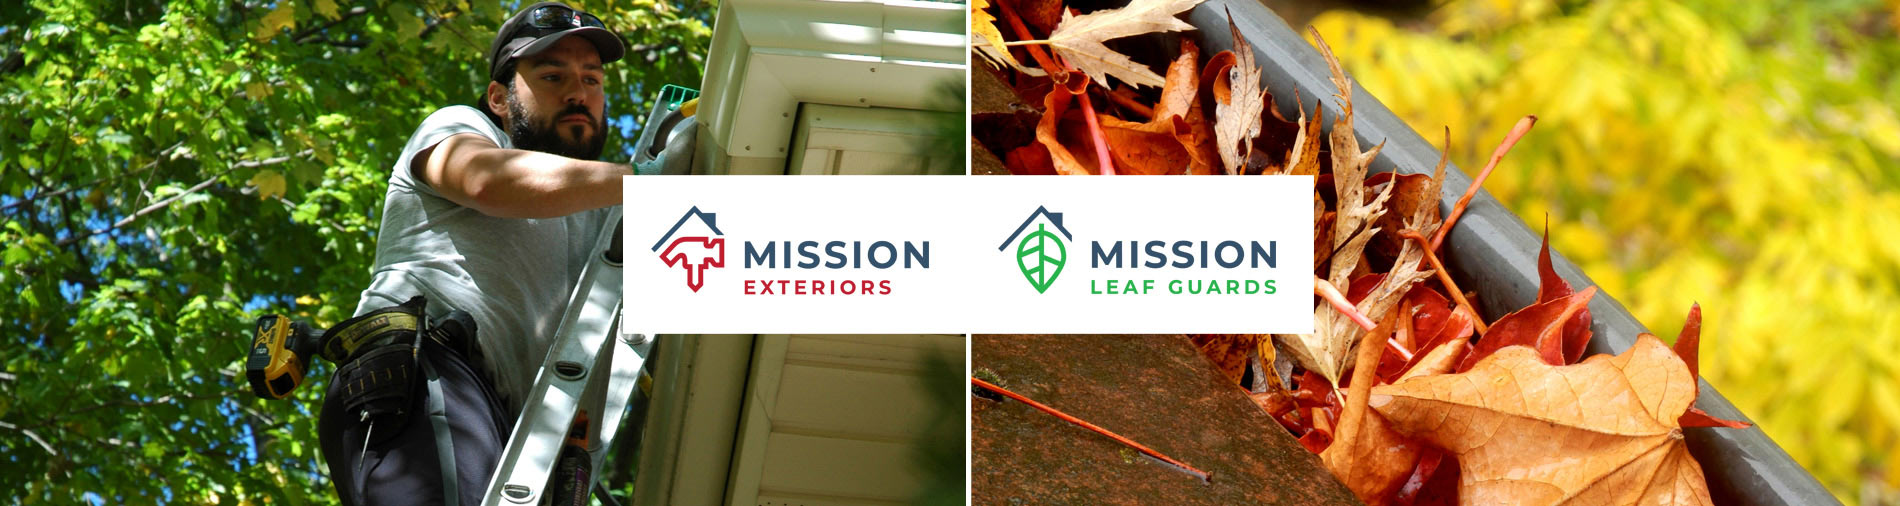 Mission Exteriors & Leafs Guards